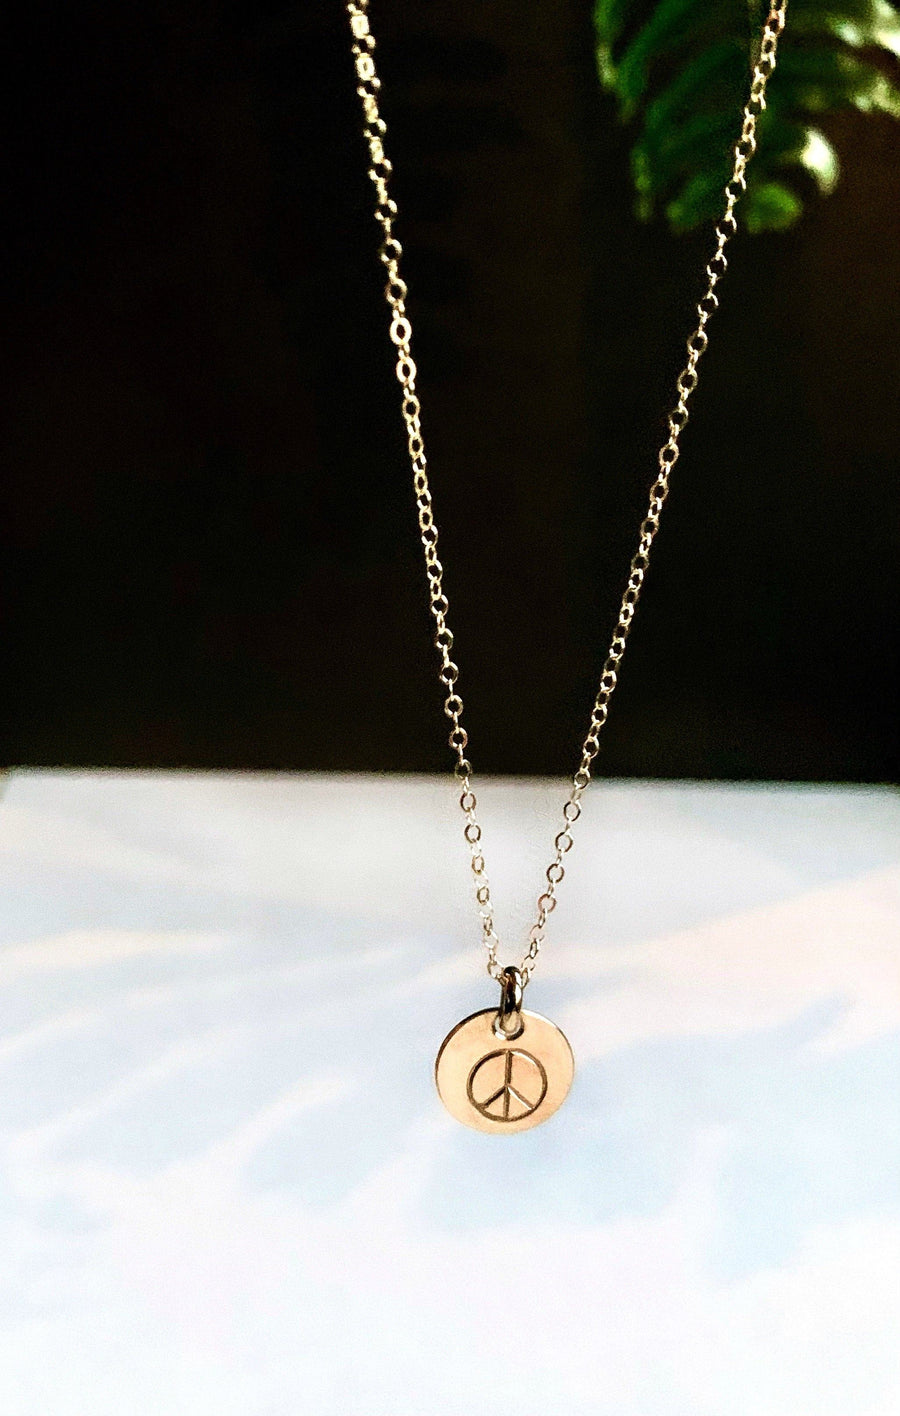 Give Peace a Chance Stack Necklace Necklace K Kay Designs 